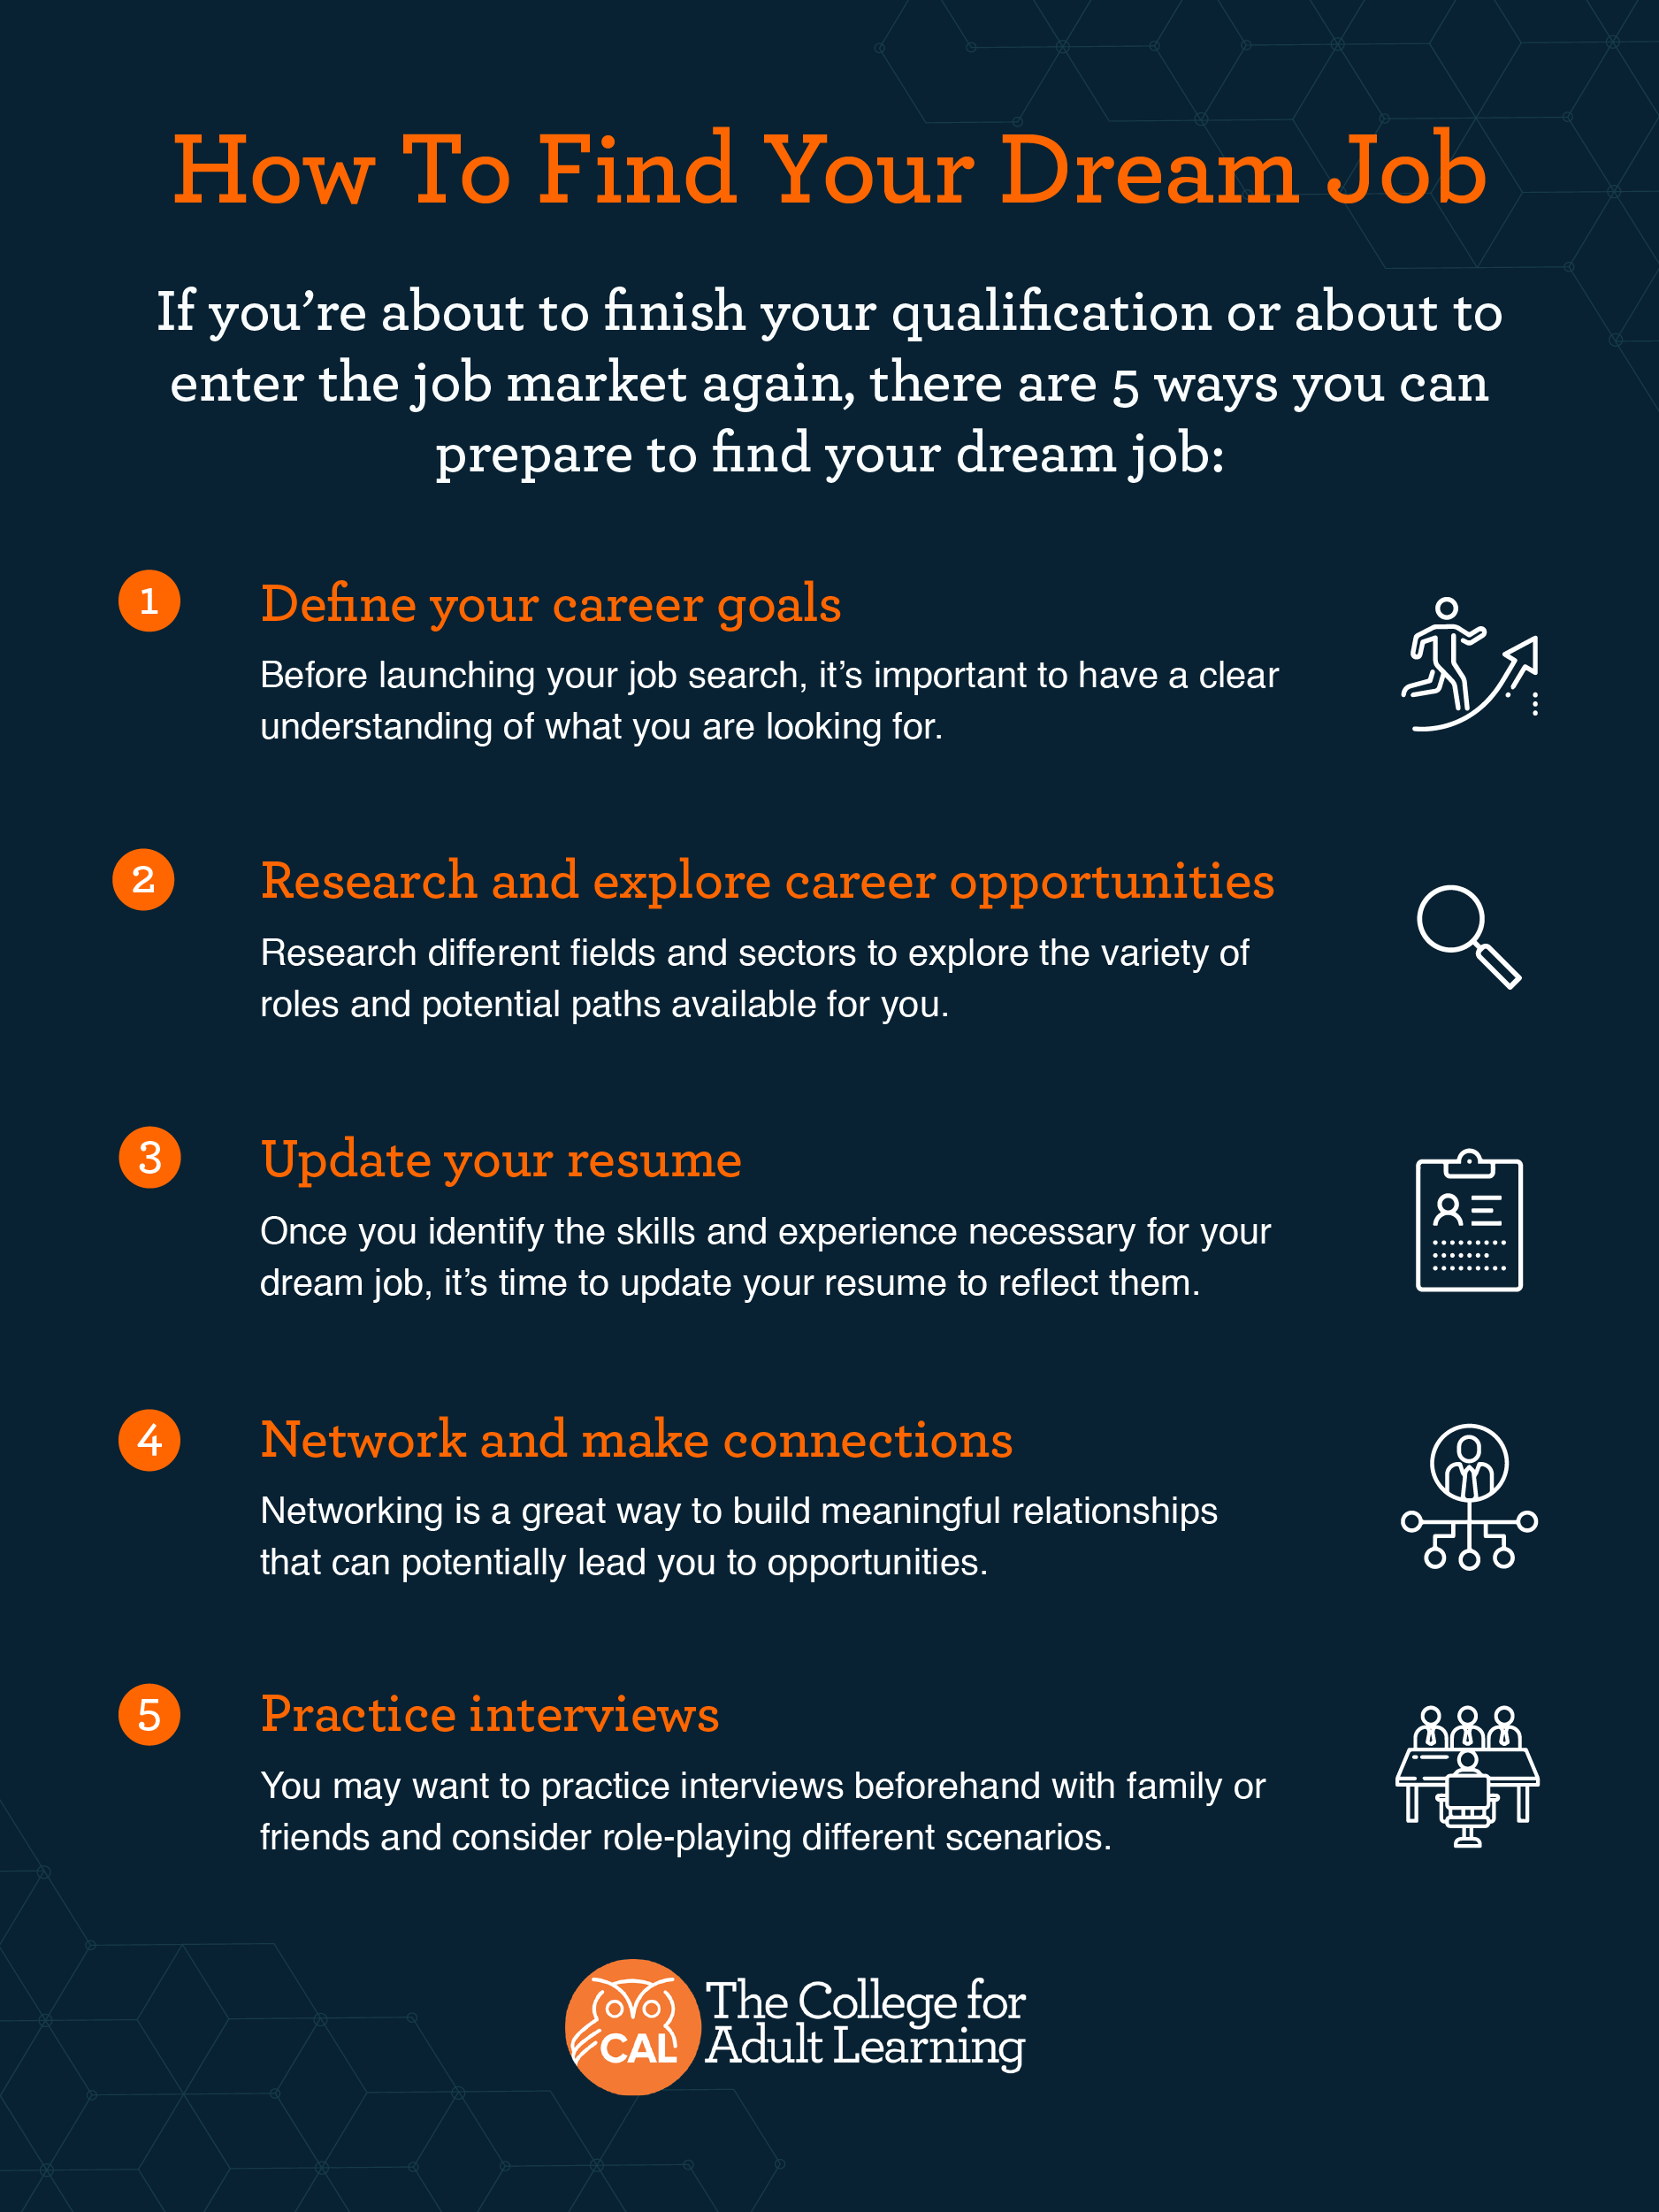 How to find your dream job